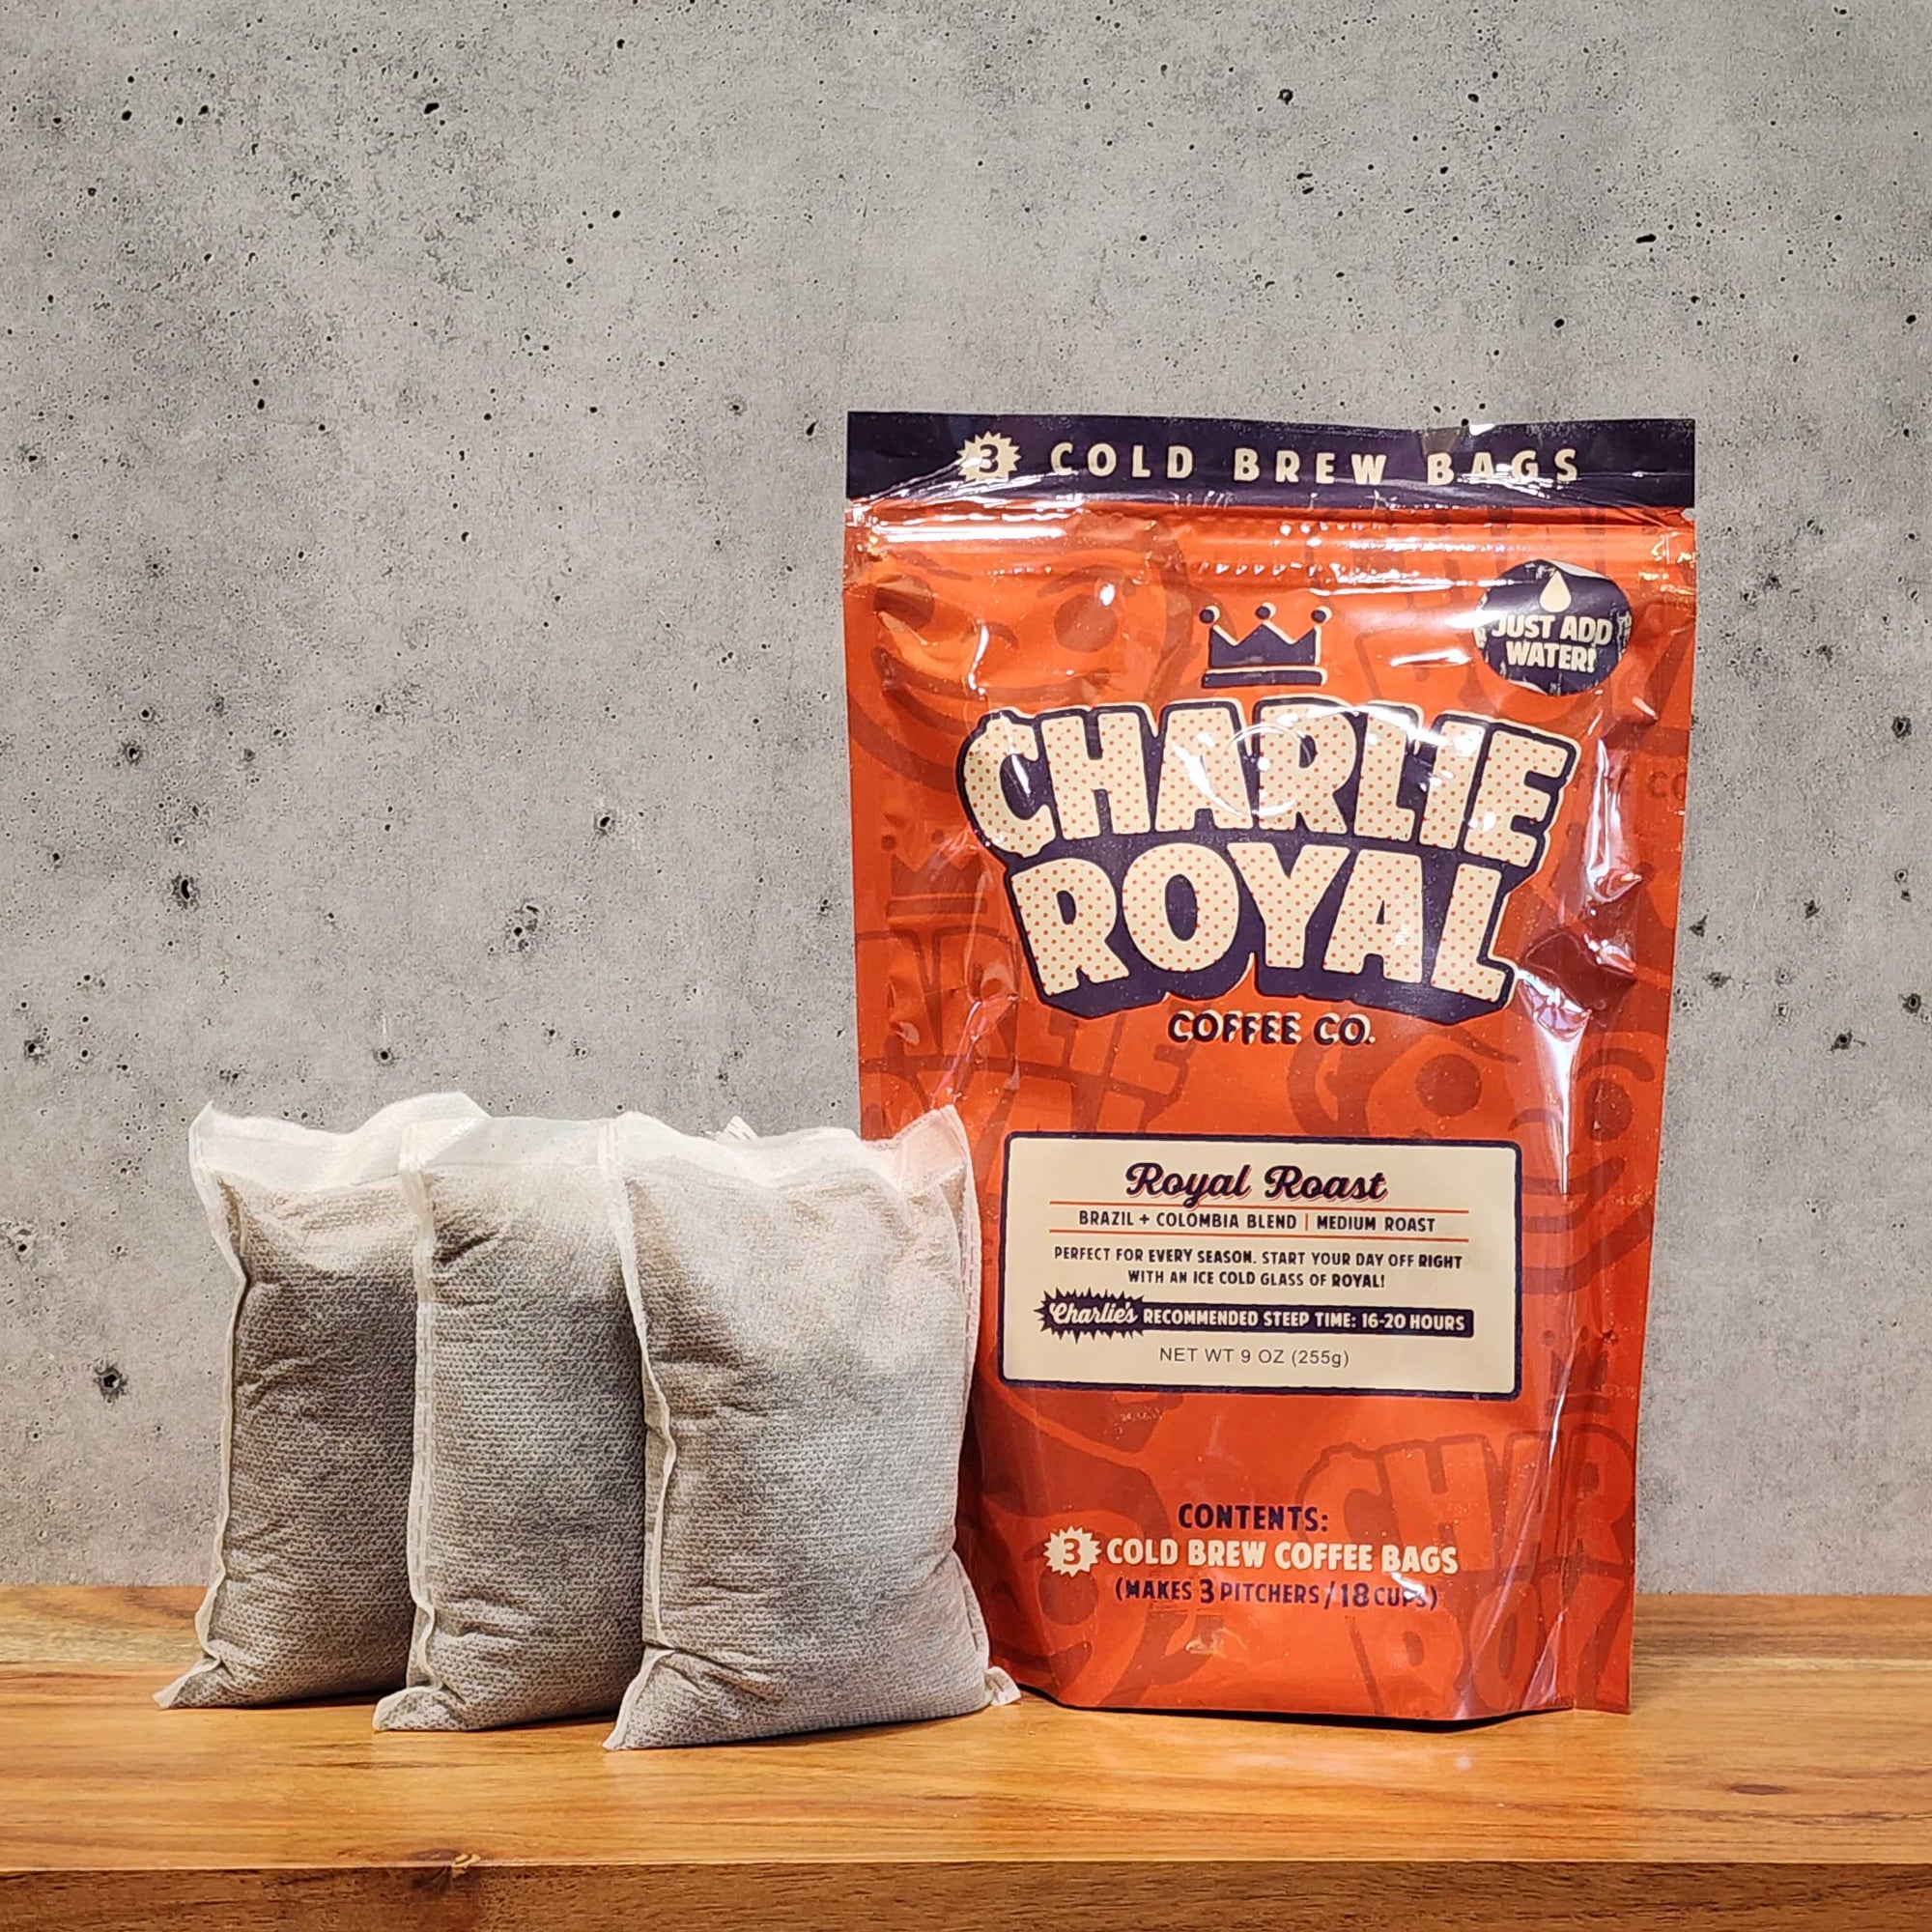 Royal Roast - 3 Cold Brew Bags